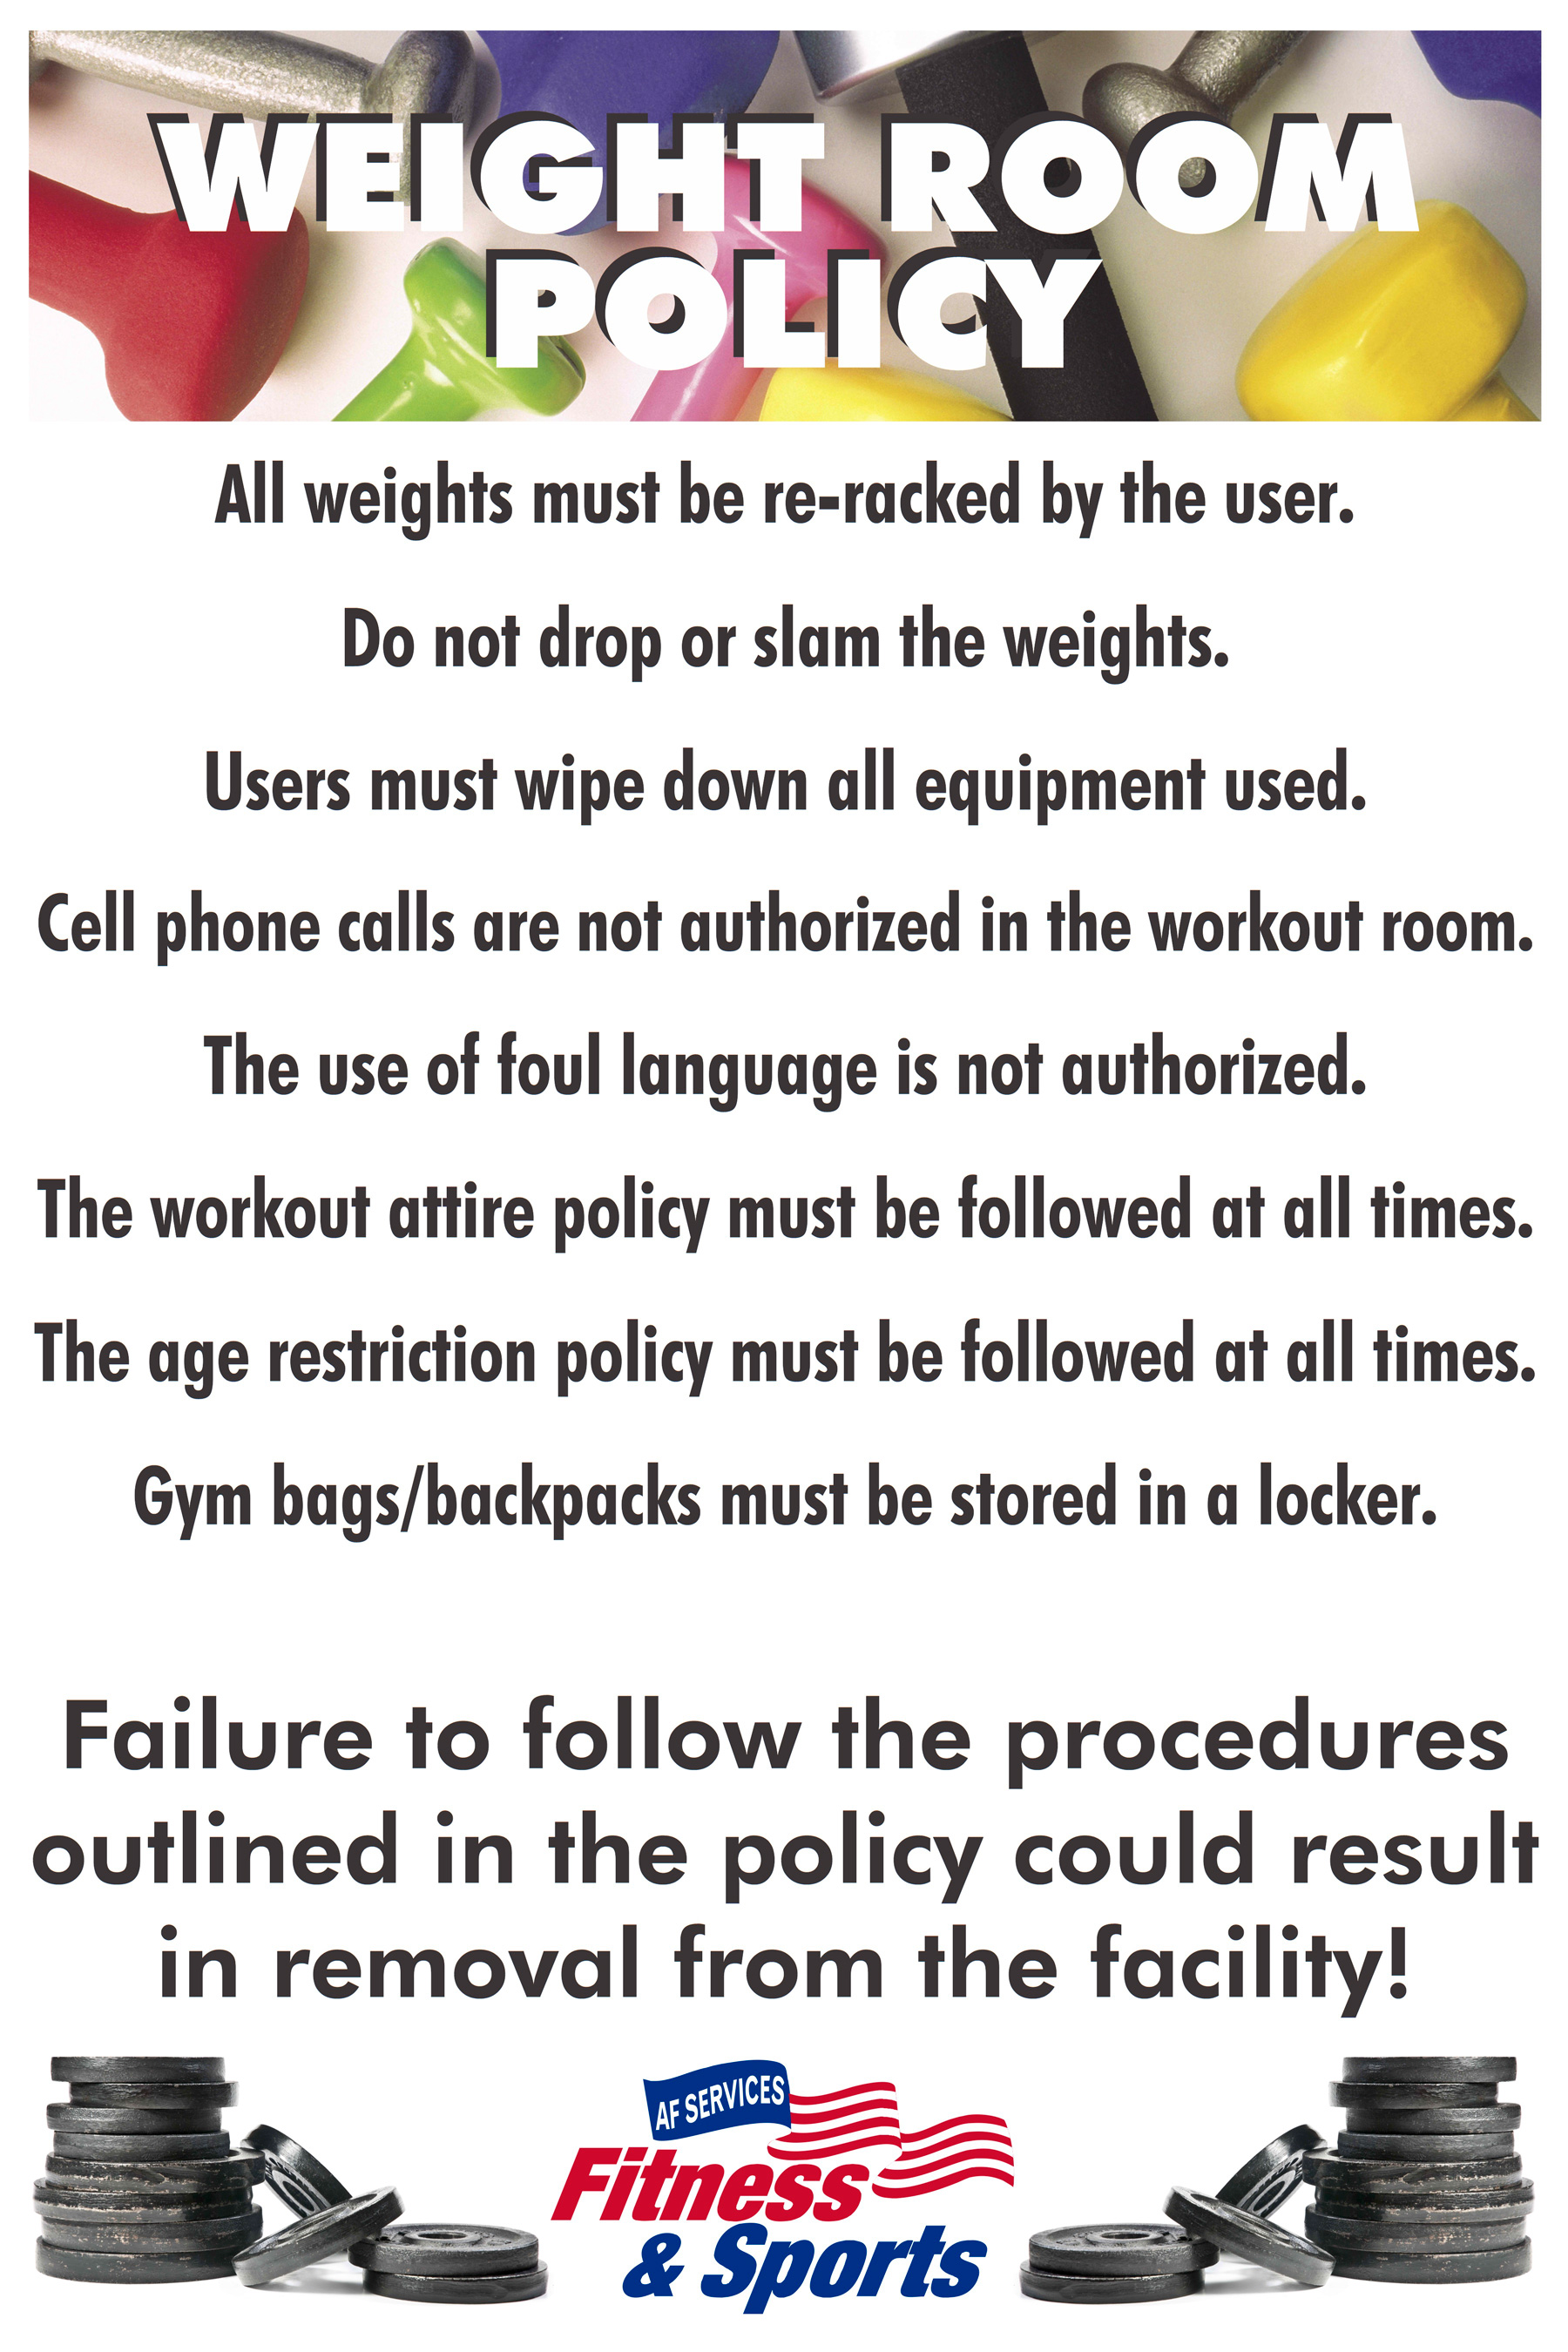 WeightRoomPolicy